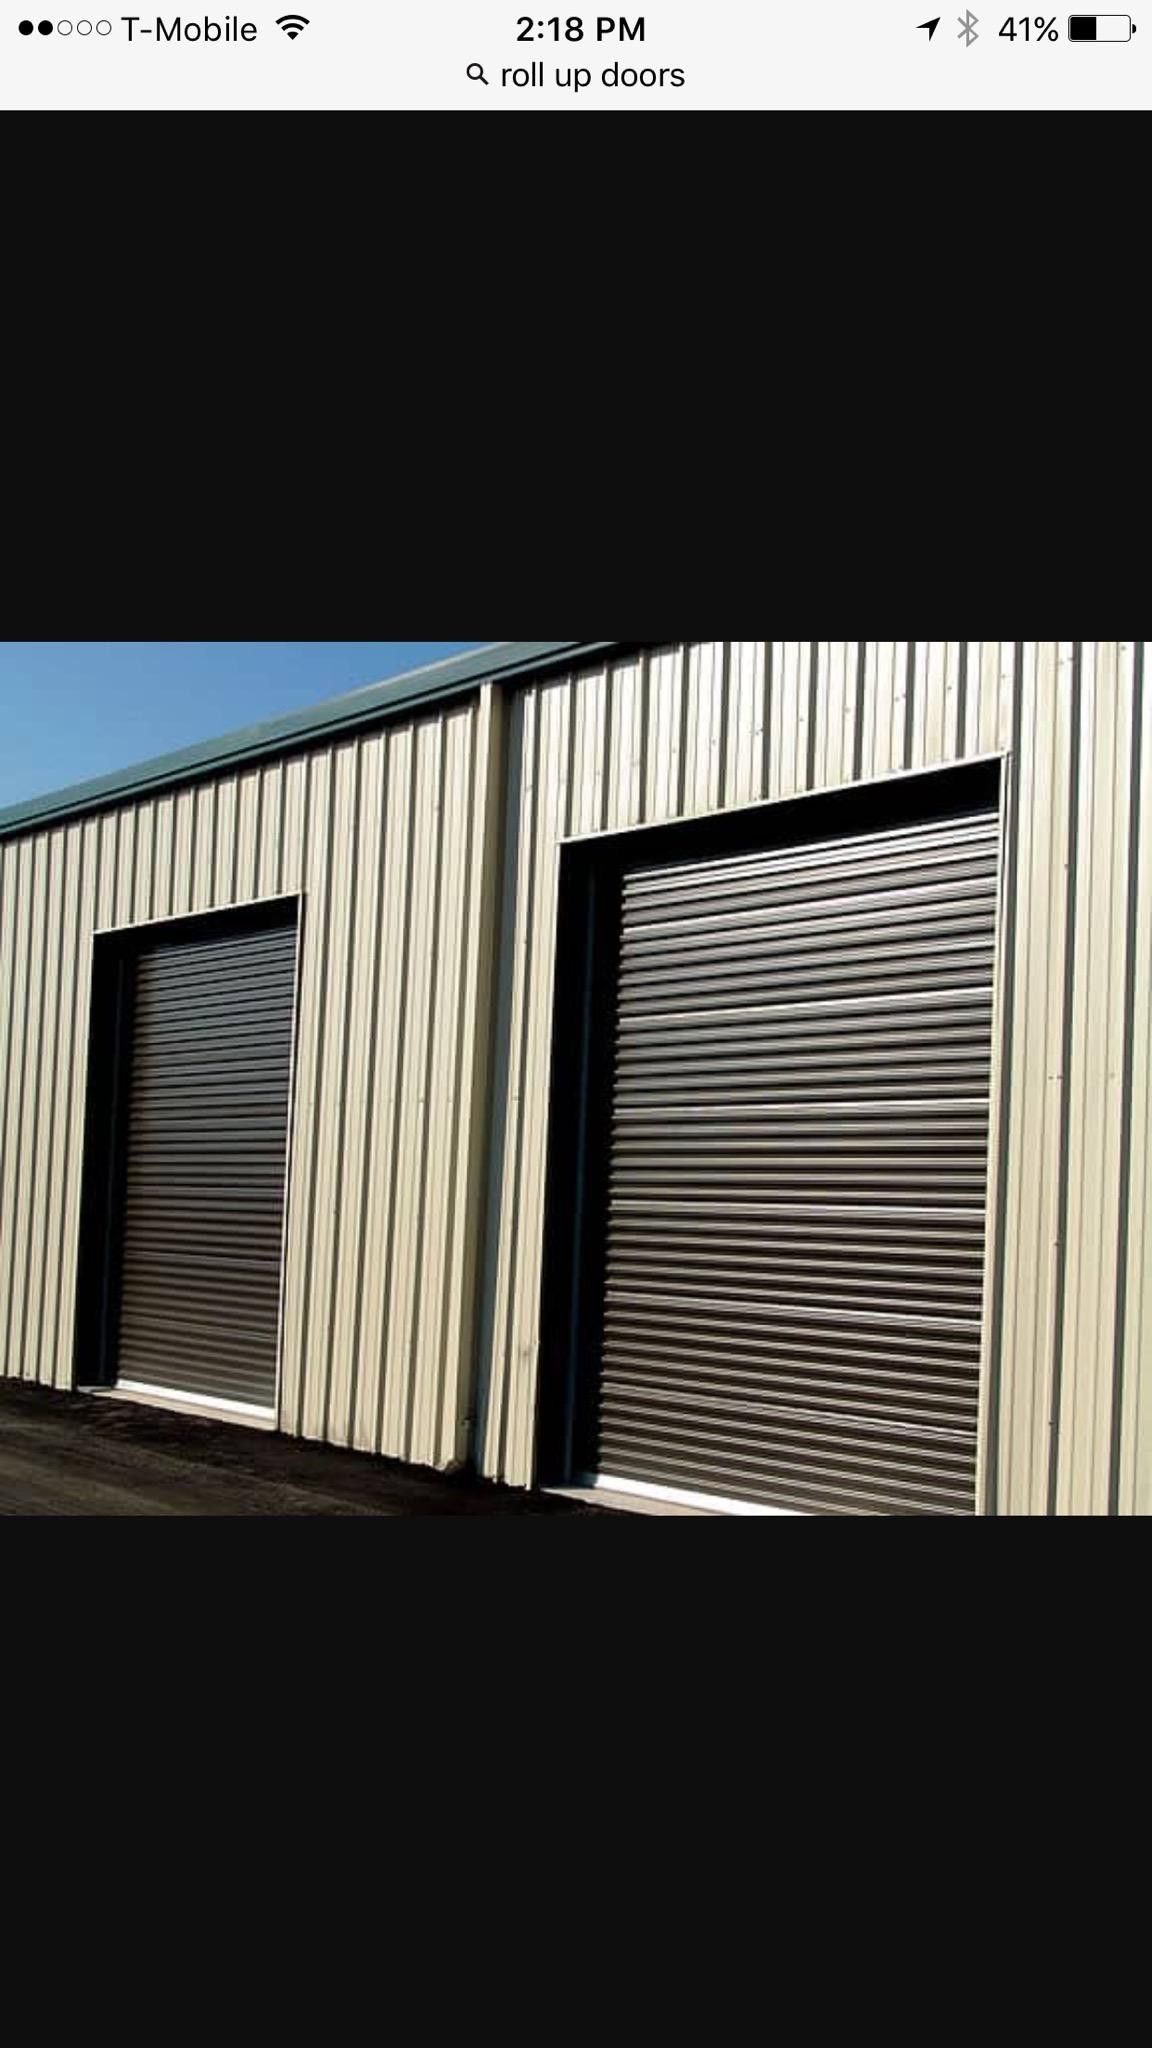 Roll up doors for storage, shed, barn, steel buildings etc.